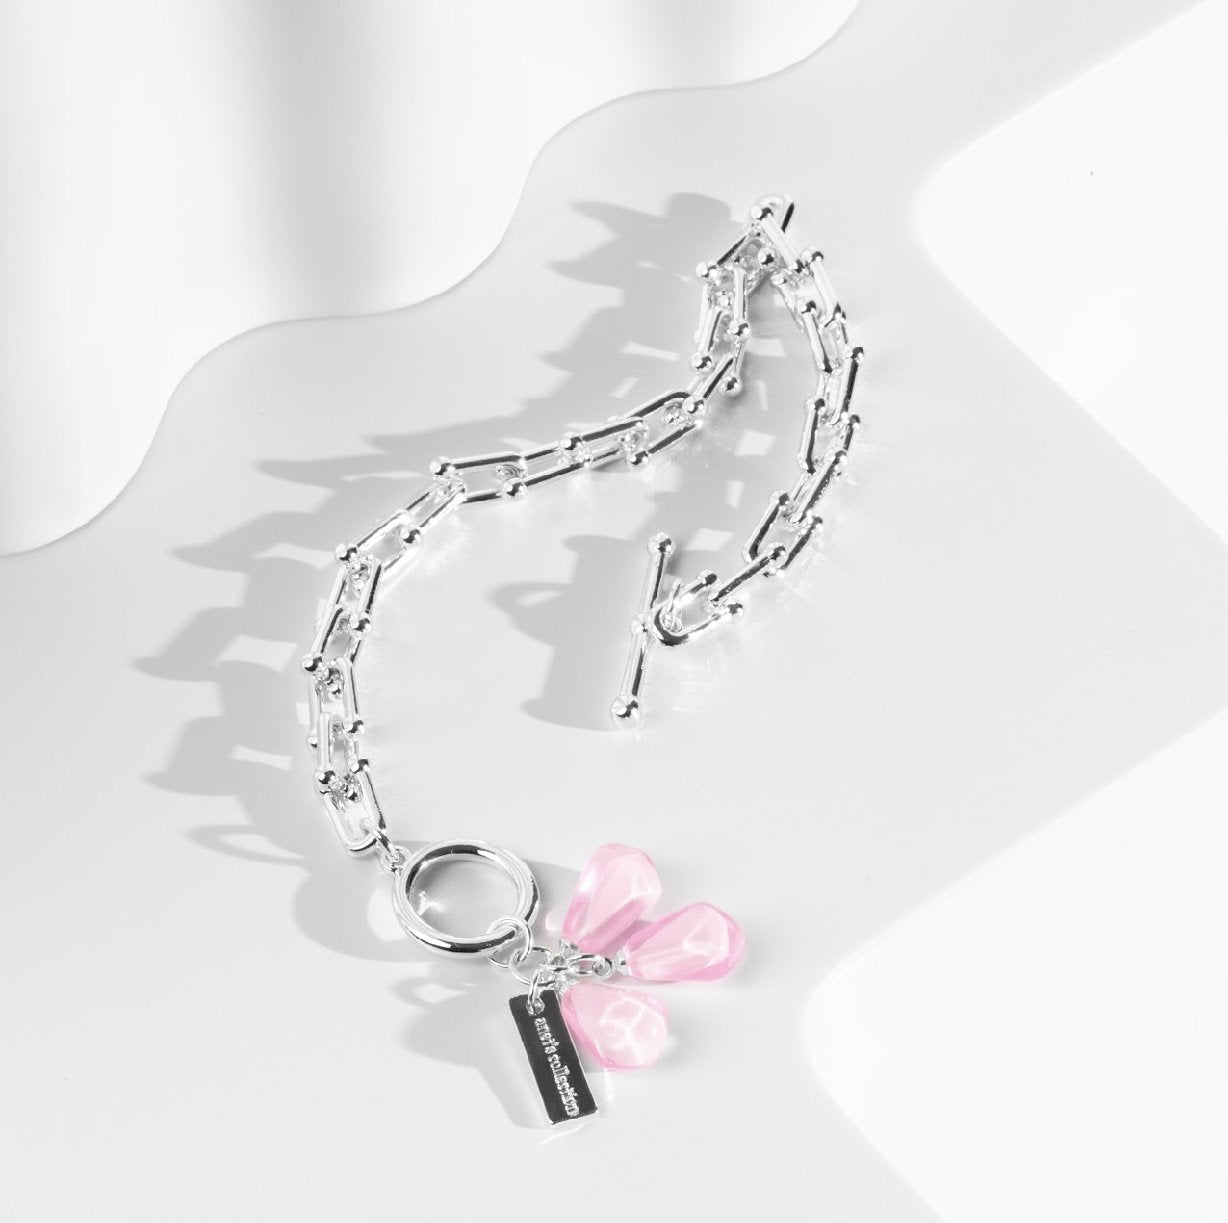 Pomegranate Seeds Bracelet in Silver and Pink